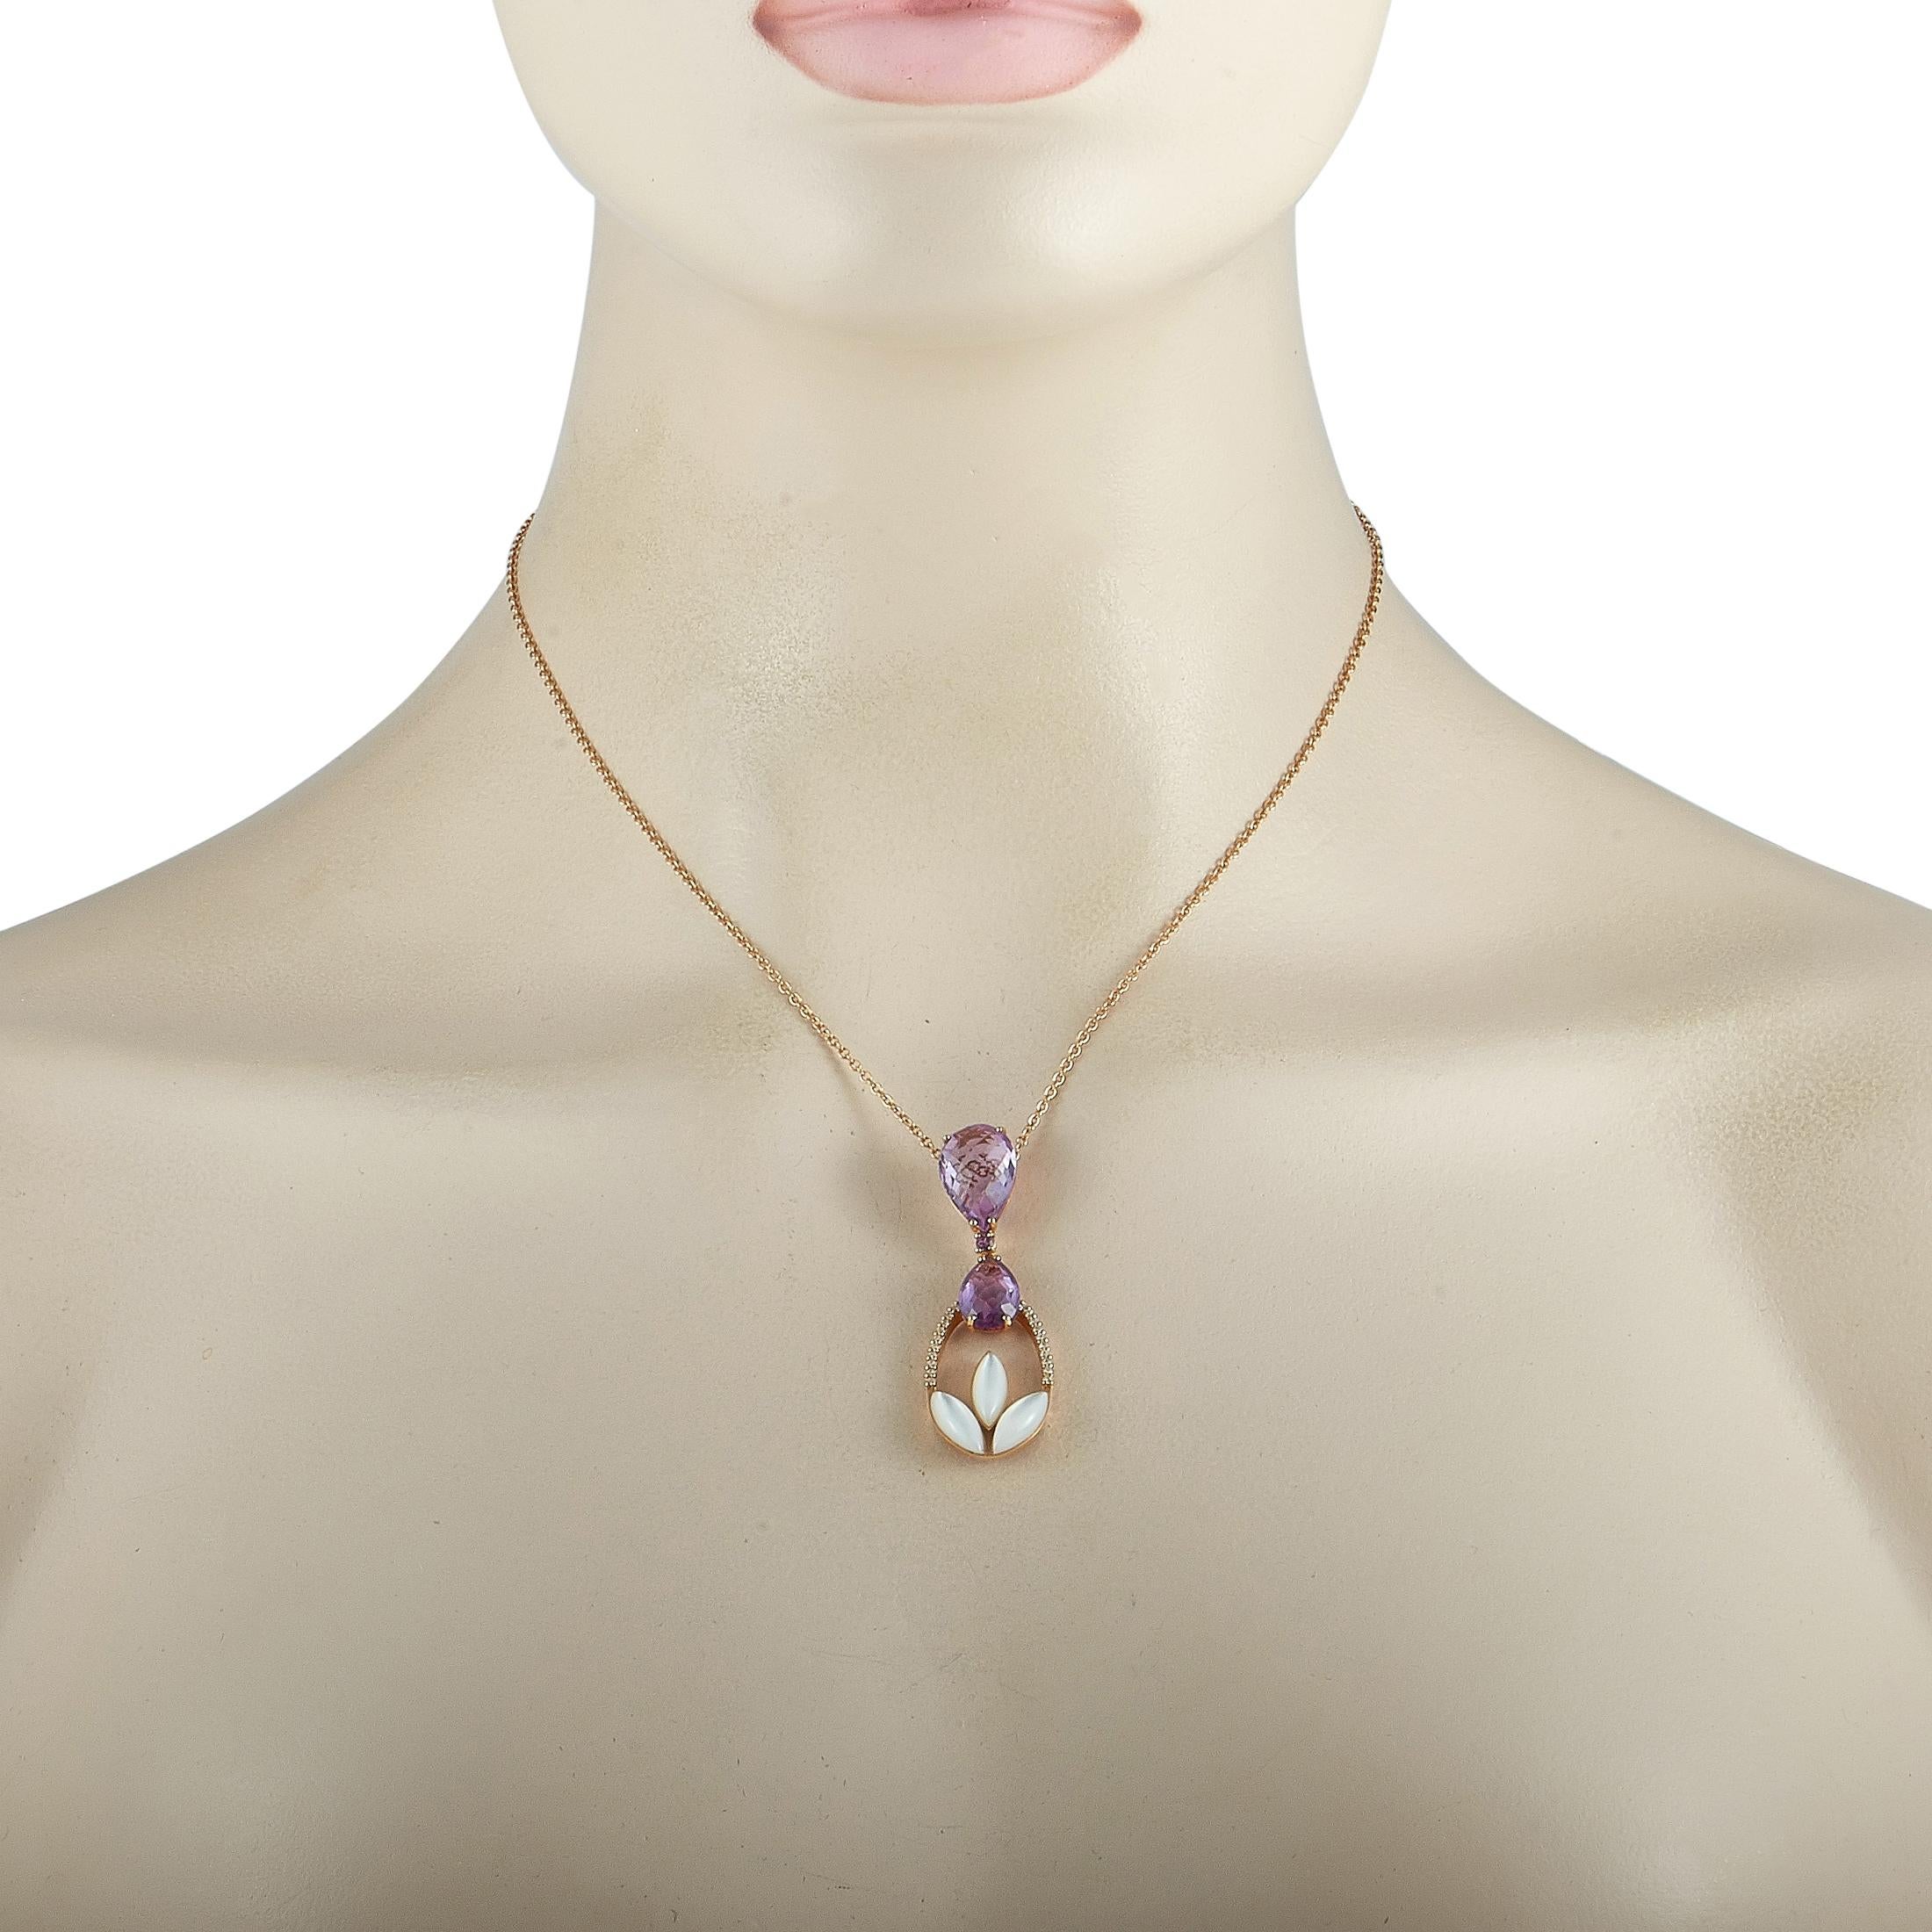 This Oro Trend necklace is crafted from 18K rose gold and embellished with mother of pearl, amethysts, and with diamonds that total 0.18 carats. The necklace weighs 10 grams and is presented with an 18” chain, boasting a pendant that measures 2” in